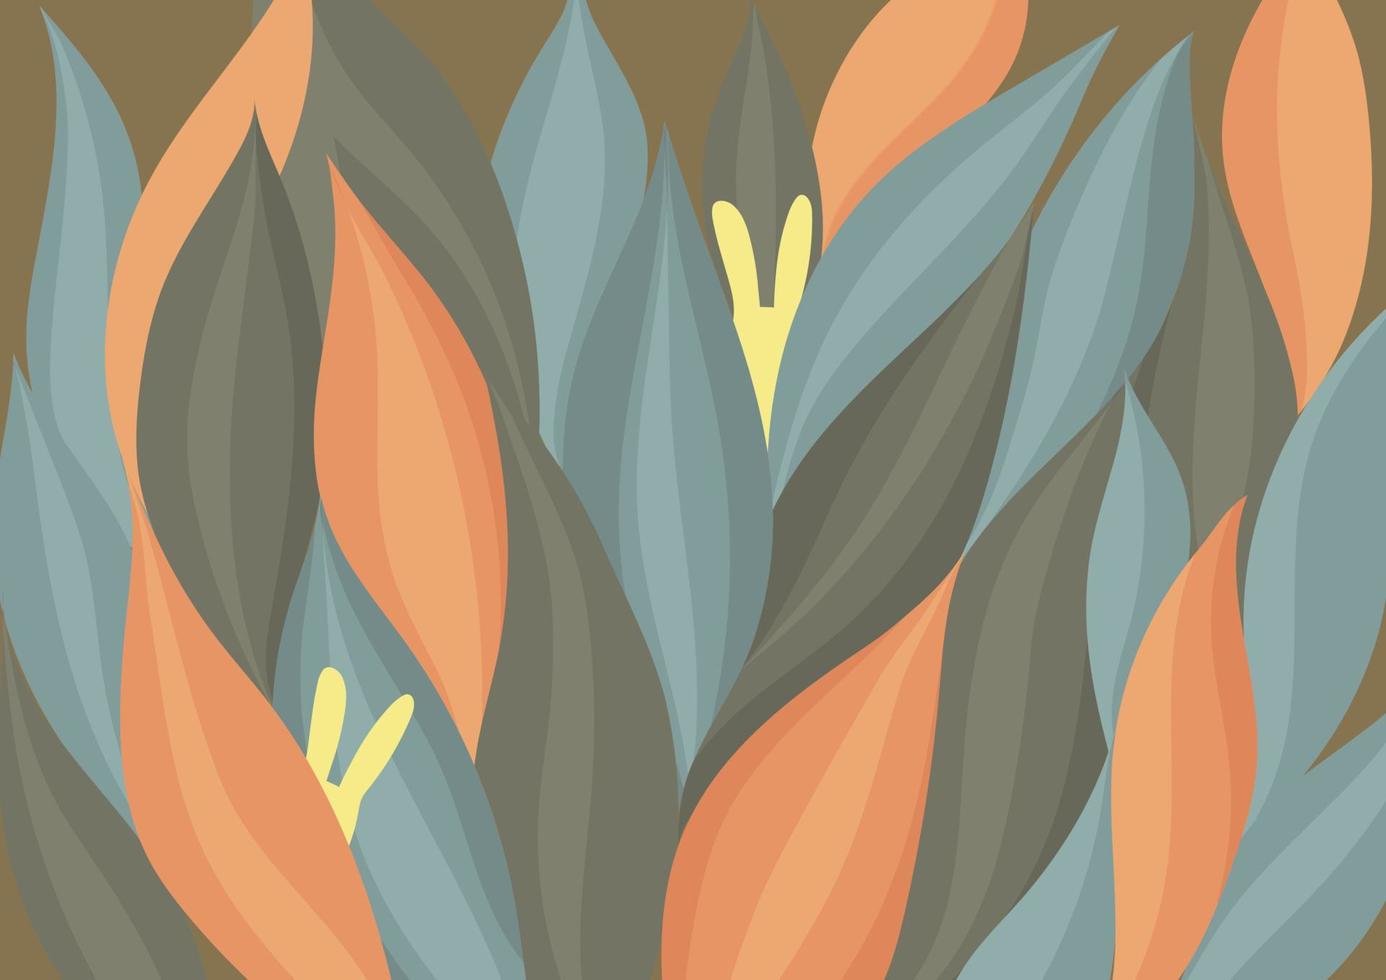 Vector illustration of a yellow bunny hiding in brown, orange, gray elegant grass on a warm dark background. Can be used for autumn, warm, easter related banners, posters and greeting cards.